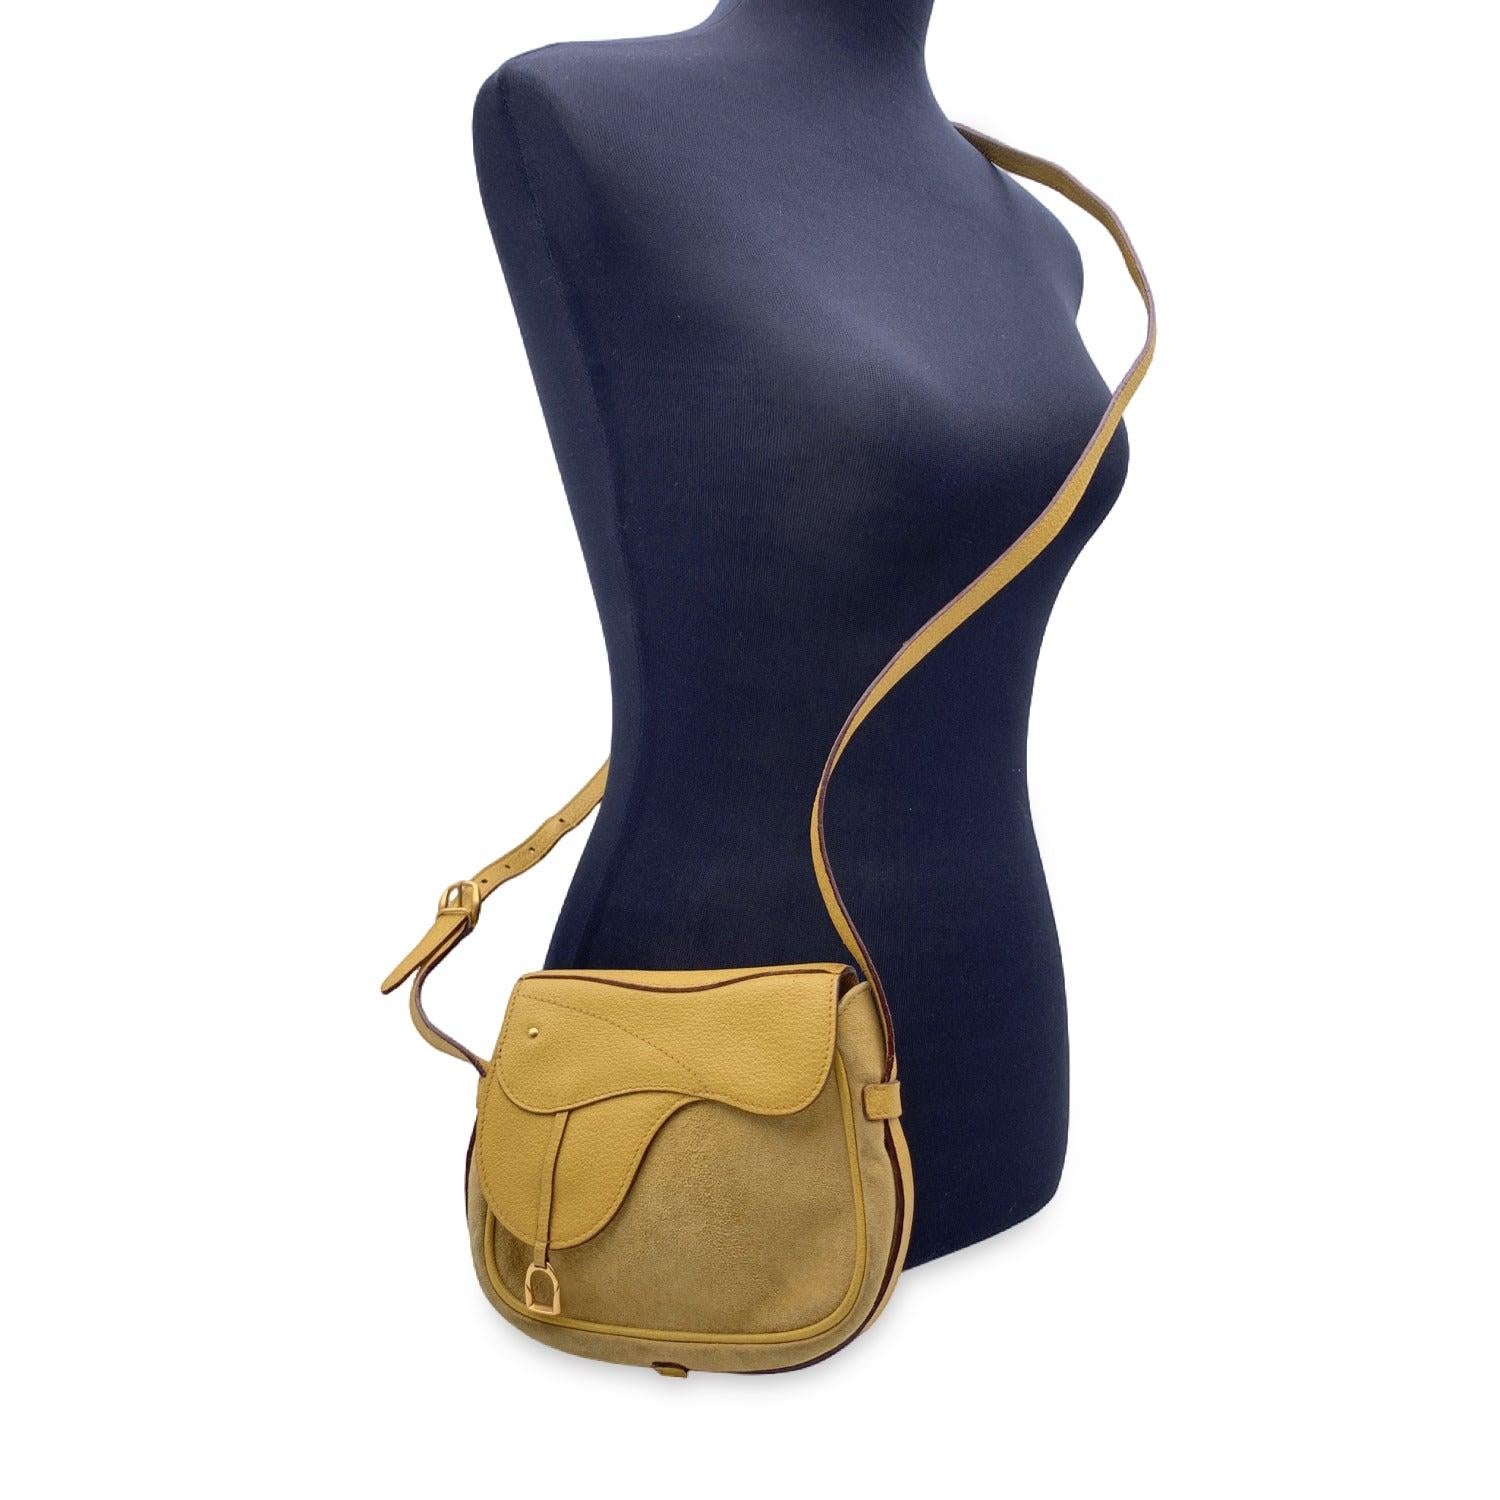 Gucci vintage shoulder bag in yellow suede and leather with saddle design. Convertible model: the bag can be worn crossbody style as well as a belt bag, thanks to 2 belt loops on the back. Flap with magnetic button closure on the front. It features